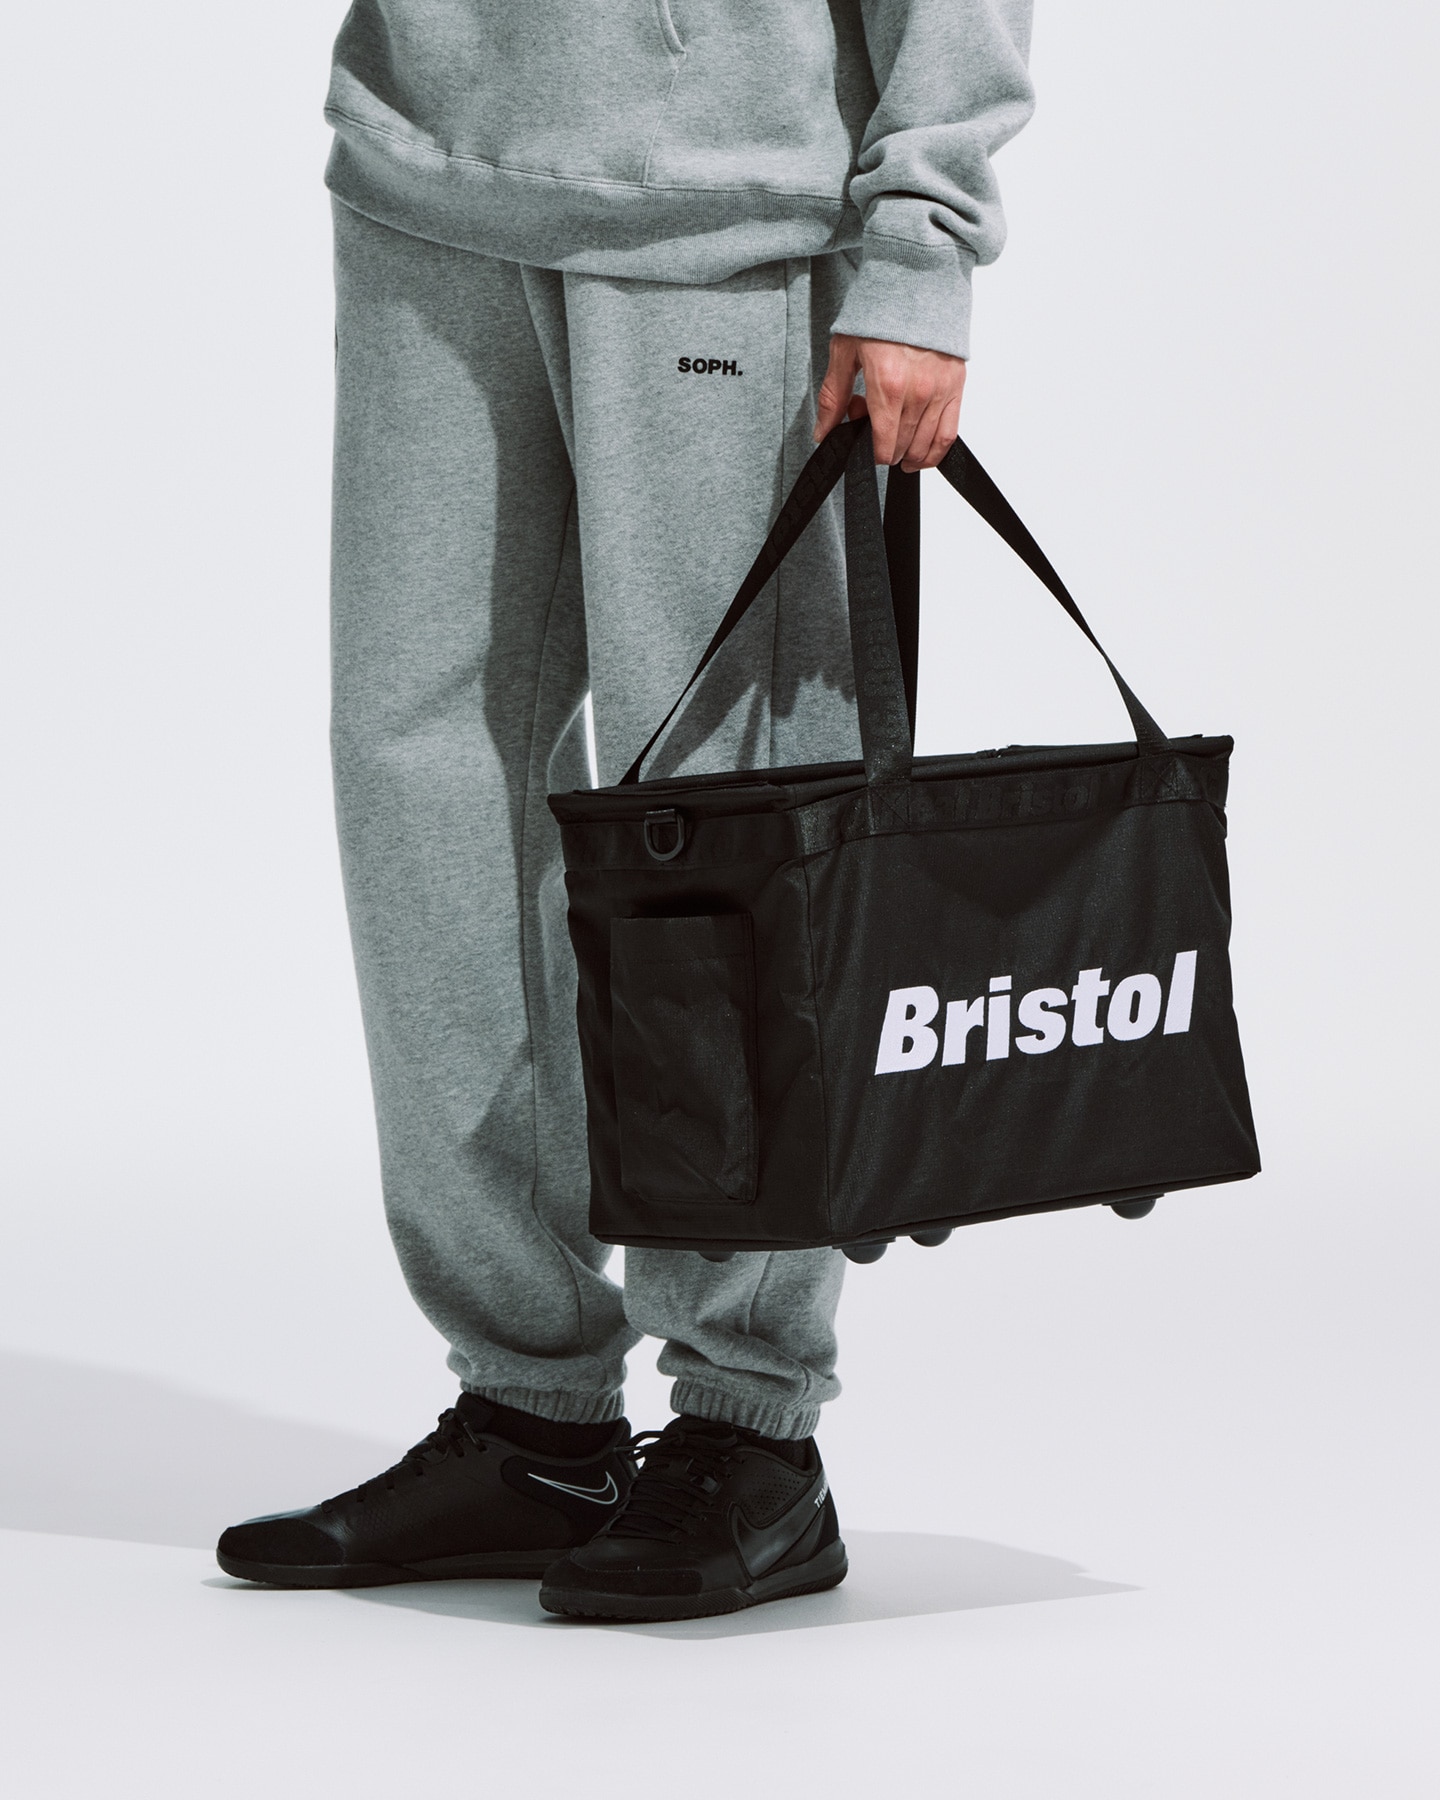 SOPH FCRB CONTAINER 二個セット コカコーラ Bristolその他